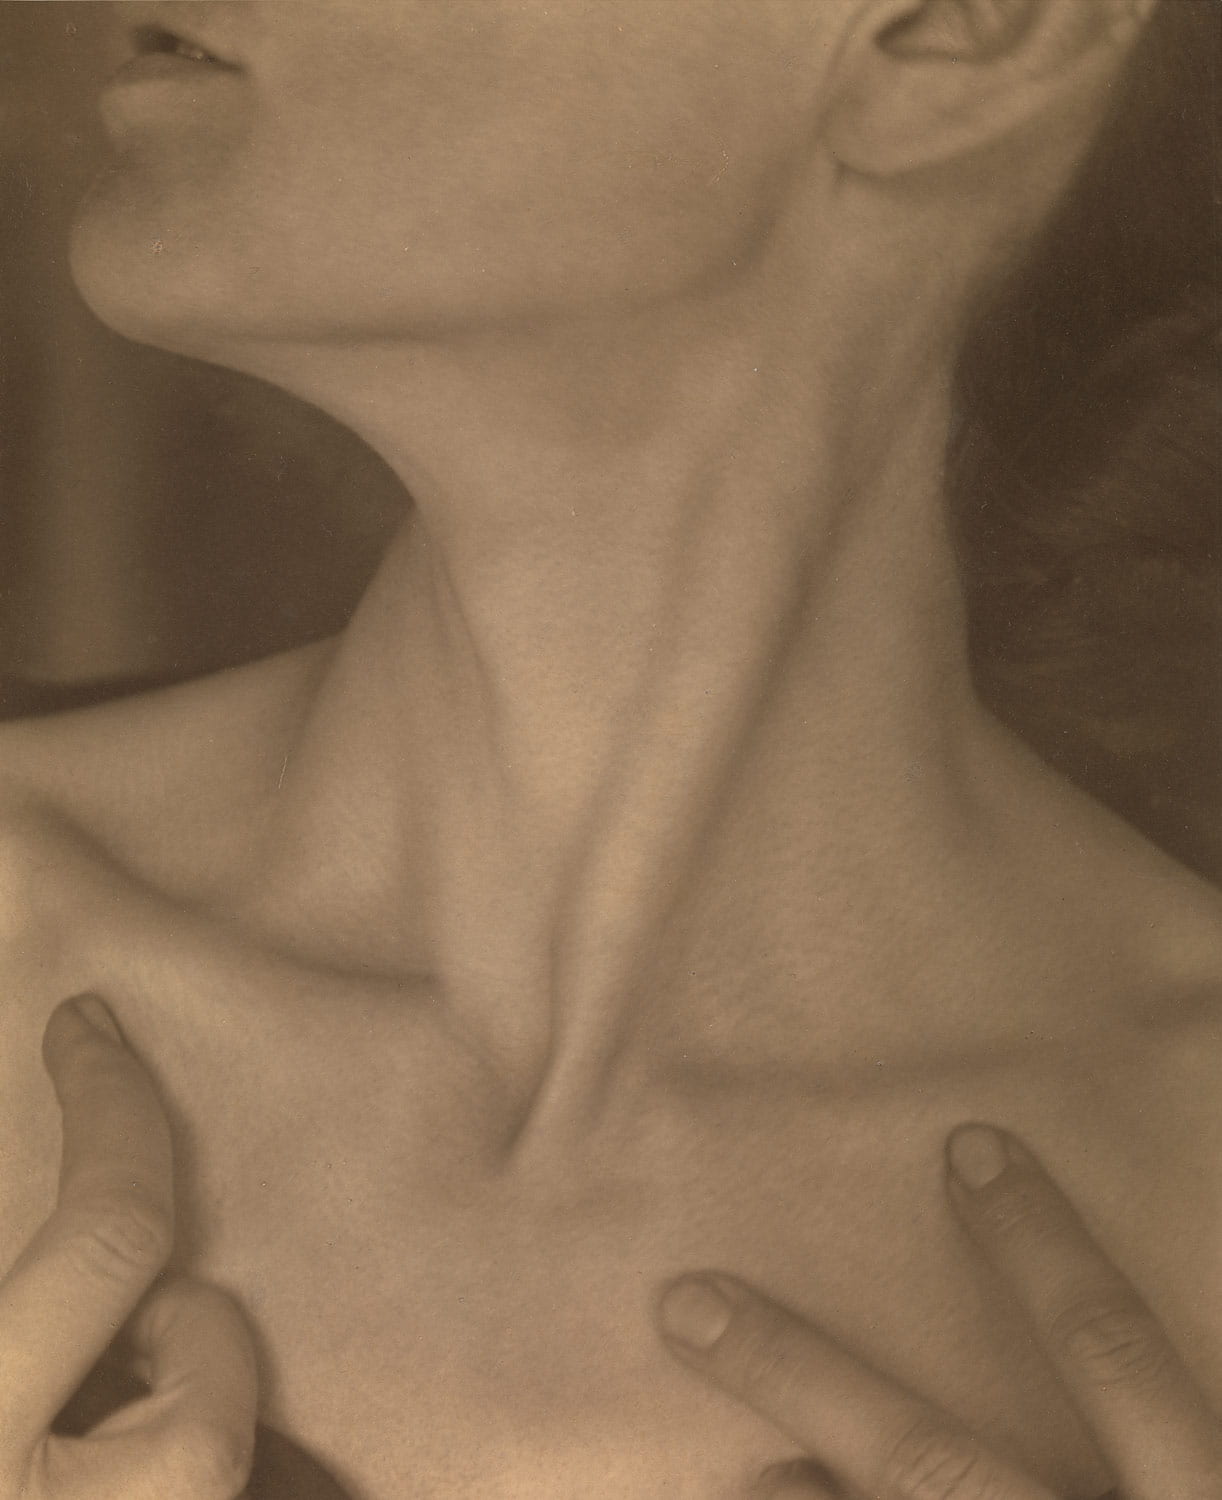 Fig. 8. Photograph of triangular musculature at the base of the neck. 